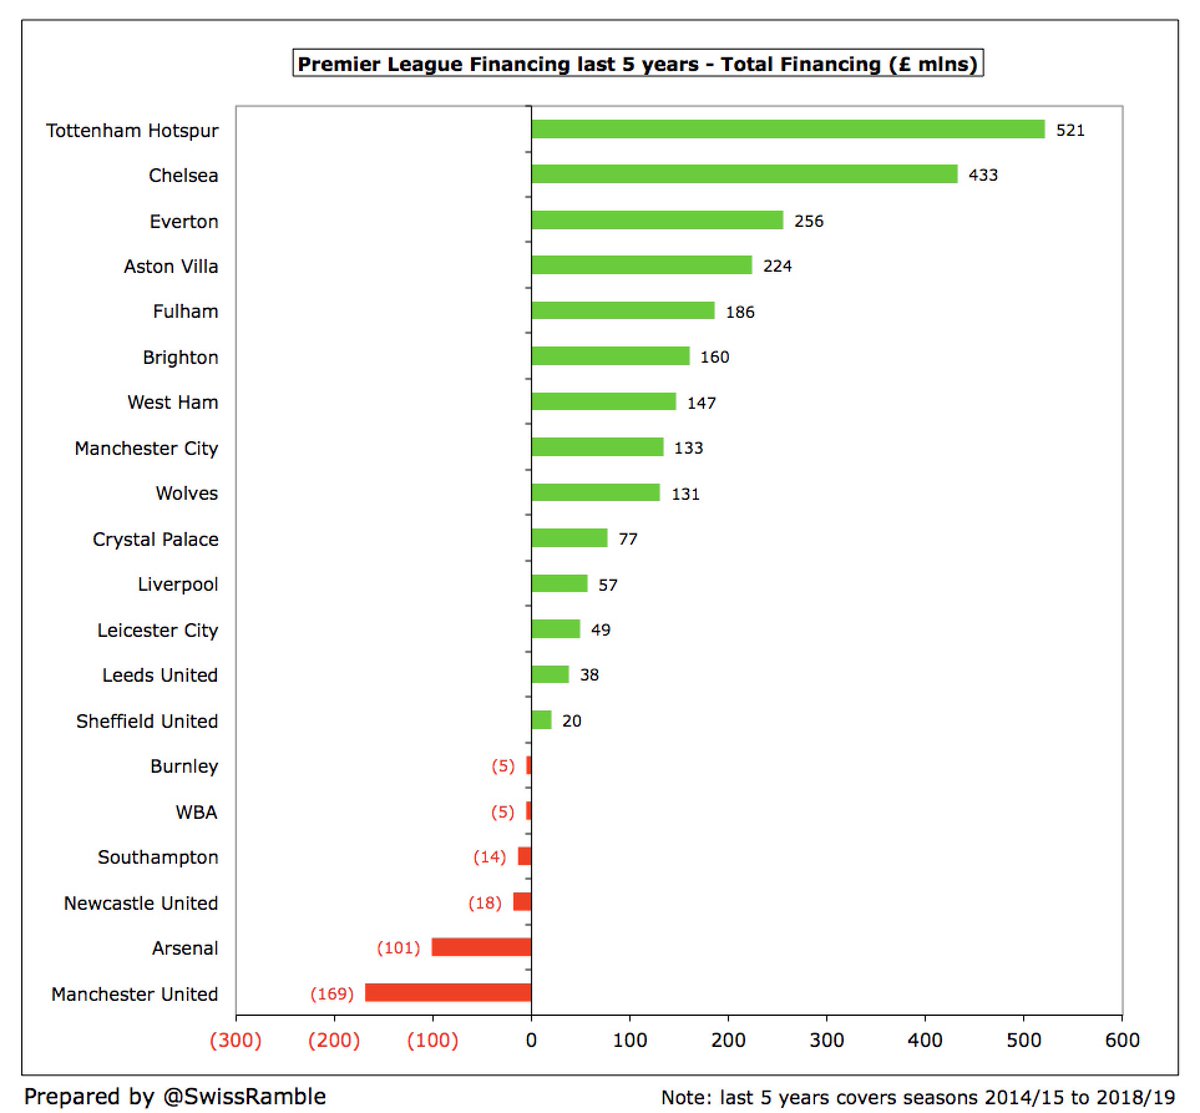 In terms of total financing, two clubs have received by far the most in the last 5 years, namely  #THFC £521m and  #CFC £433m, followed by  #EFC £256m,  #AVFC £224m and  #FFC £186m. In stark contrast,  #MUFC and  #AFC had significant net cash outflows with £169m and £101m respectively.